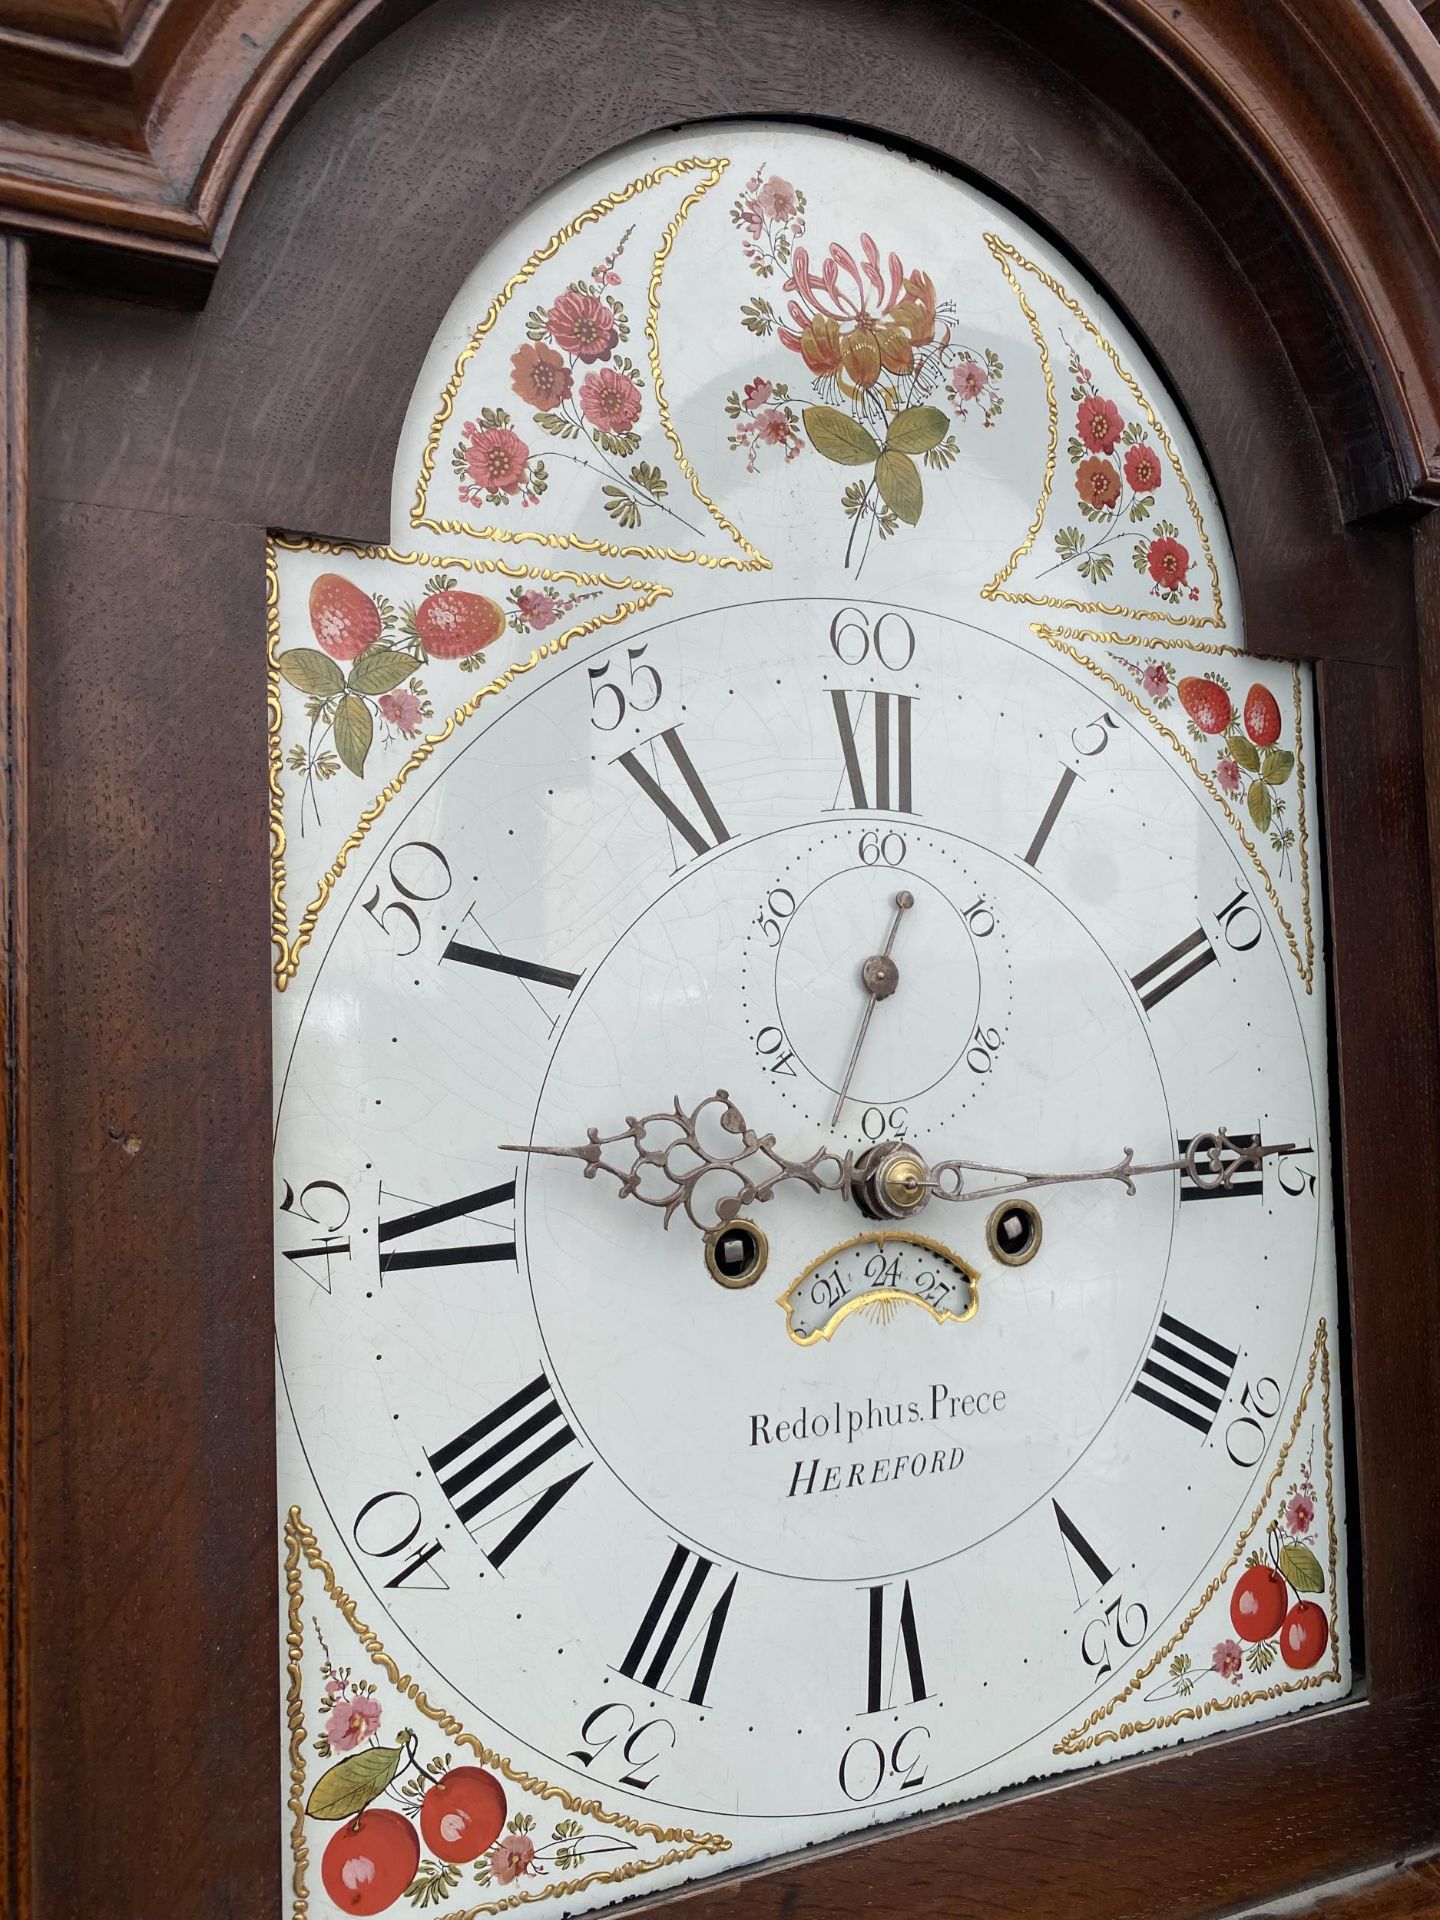 A 19TH CENTURY OAK EIGHT-DAY LONGCASE CLOCK WITH PAINTED ENAMEL FACE BY REDOLPHUS PRECE, HEREFORD - Image 5 of 6